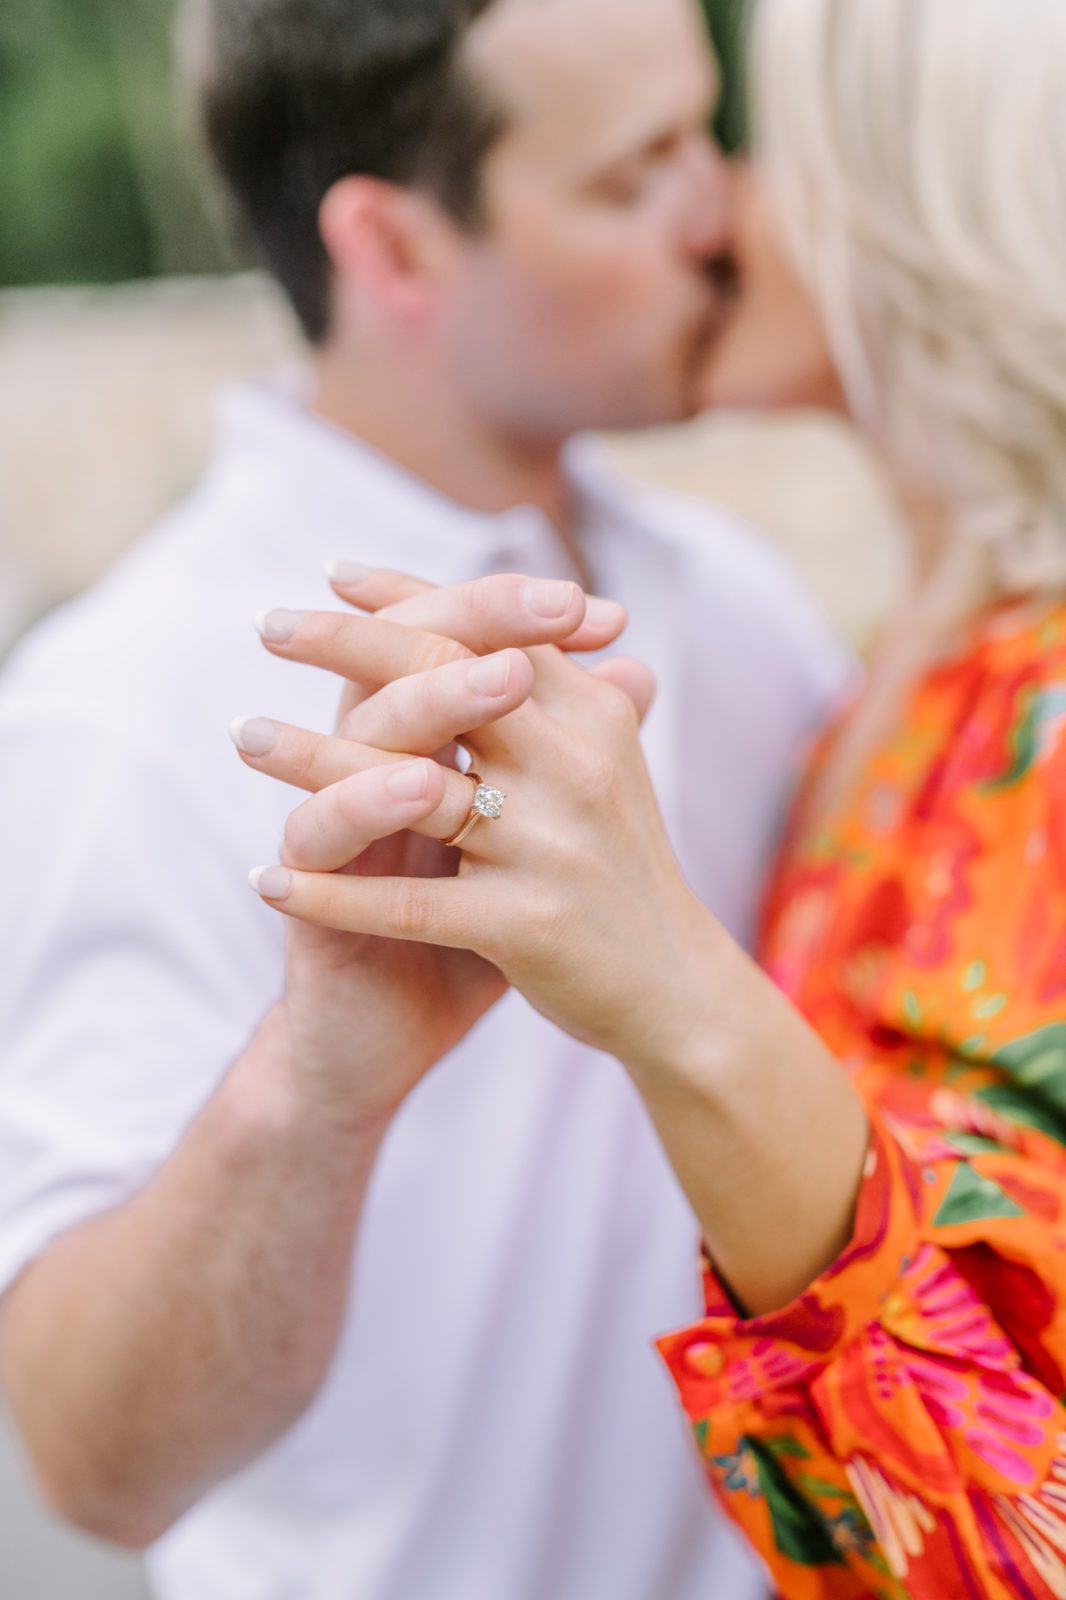 A close-up detailed portrait of a man and woman holding hands wearing a wedding ring by Christina Elliott Photography. wedding ring #ChristinaElliottPhotography #ChristinaElliottEngagements #LakeLivingston #summerengagements #Texasphotographer